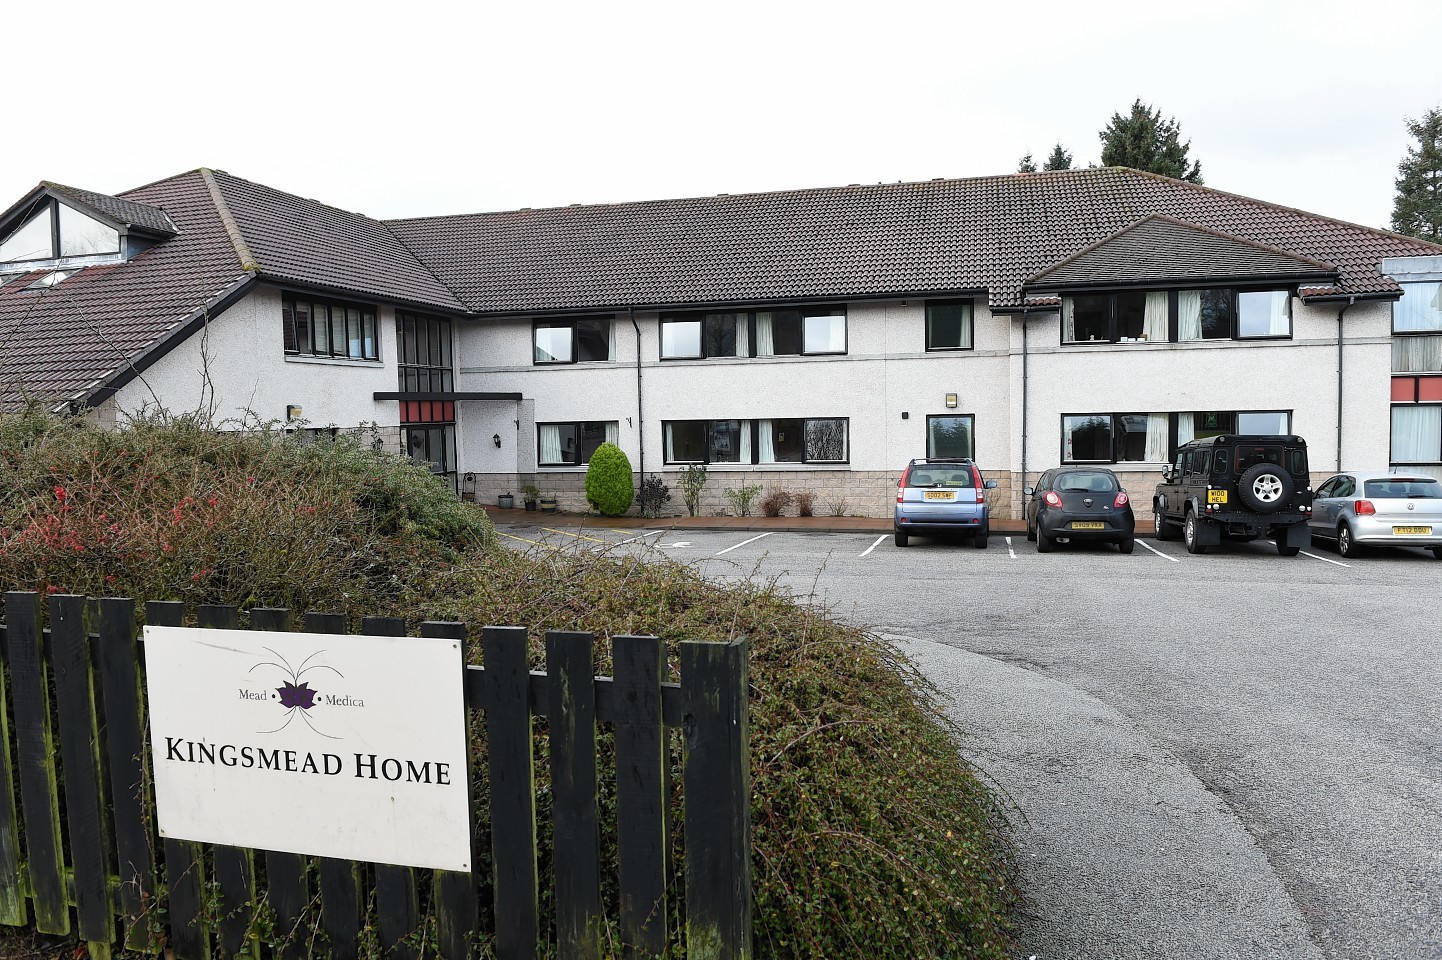 Staff were drafted in to take control of crisis-hit Kingsmead Nursing Home after a damning Care Inspectorate report.